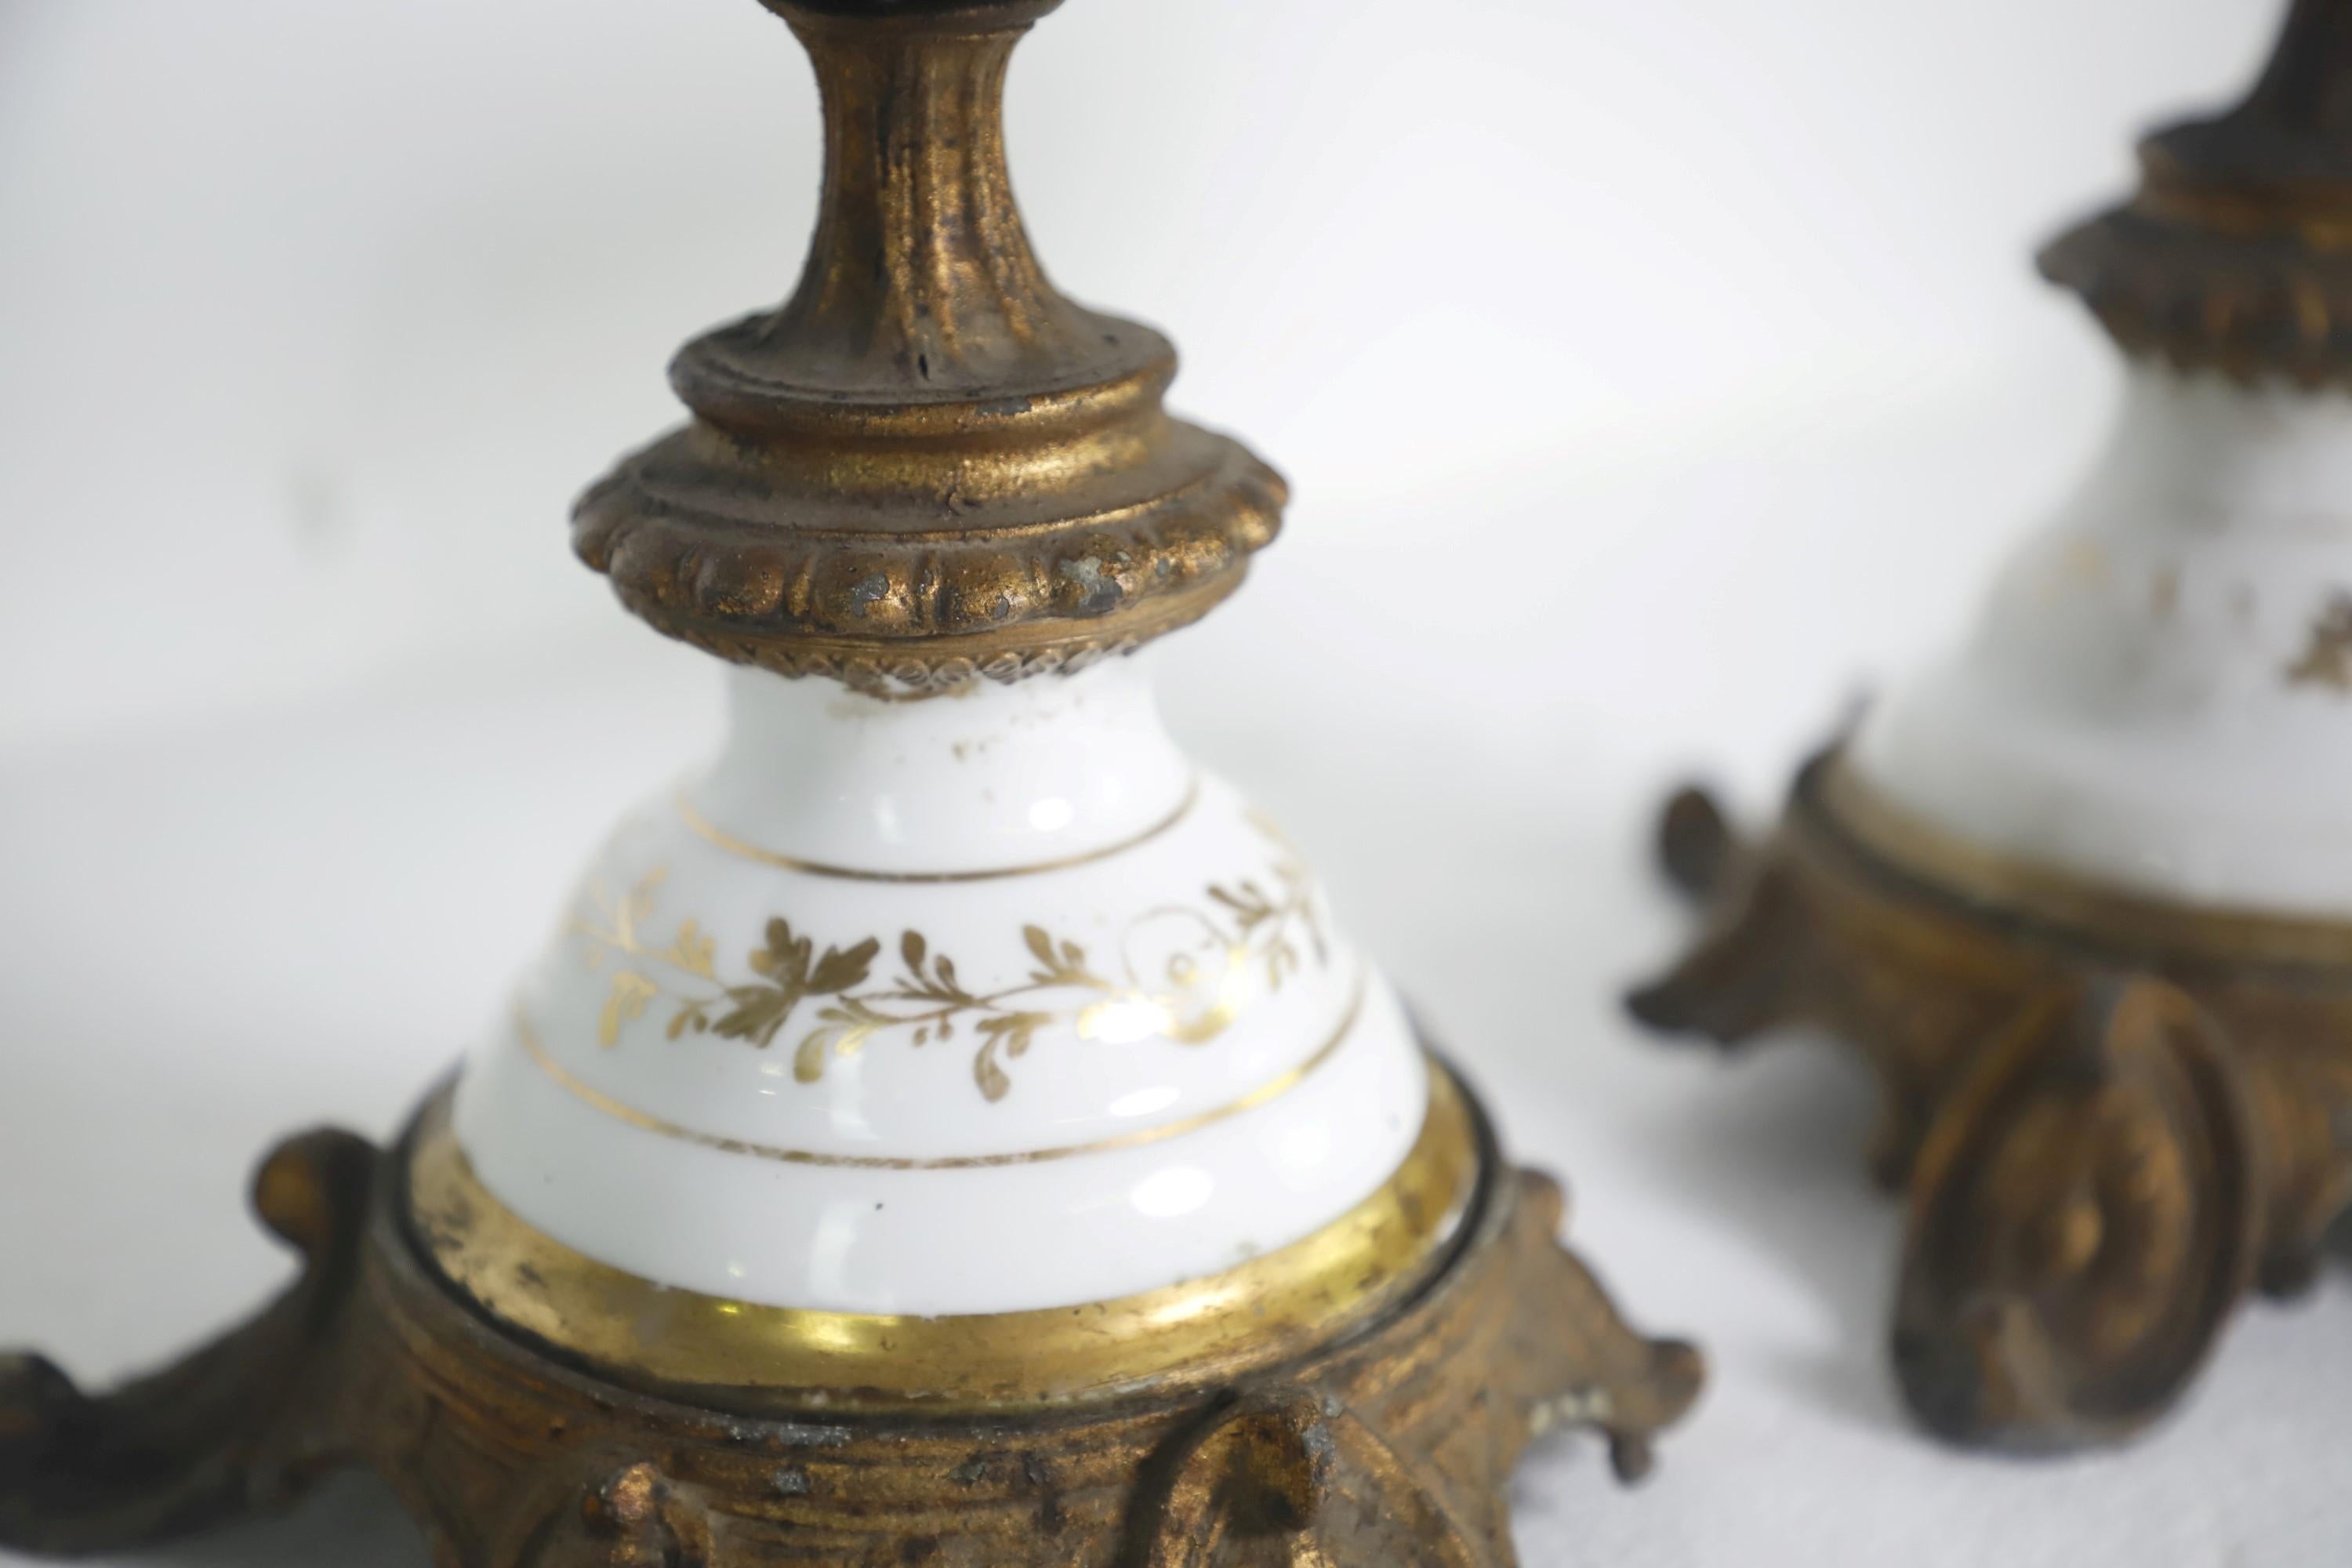 Ornate brass plated spelter zinc metal oil lamp holders with a white and gold porcelain body. They are patinaed but are in good condition. Priced as a pair. Please note, this item is located in our Scranton, PA location.